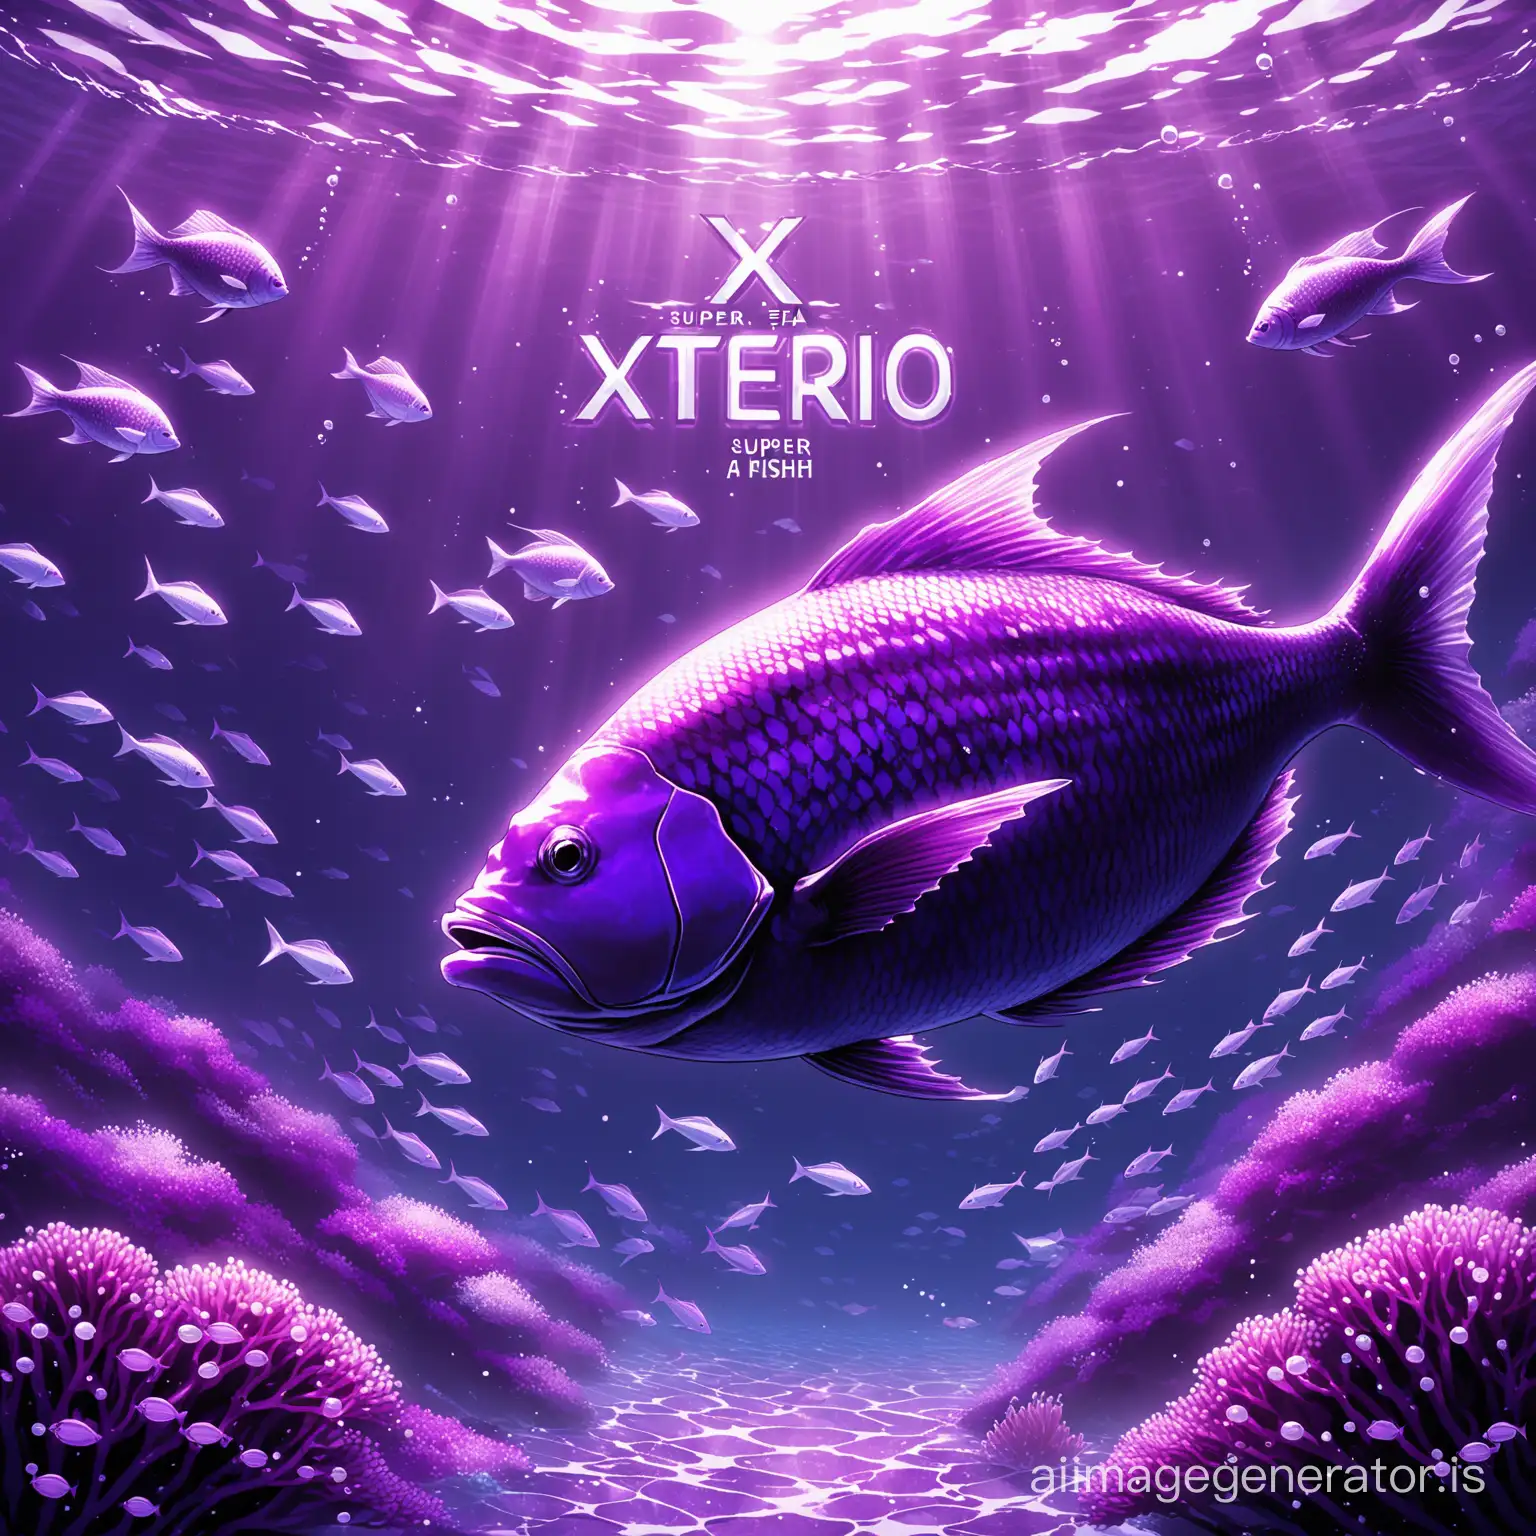 we have purple sea
a super detail a purple fish
we see " xterio" text in back ground
details are high quality